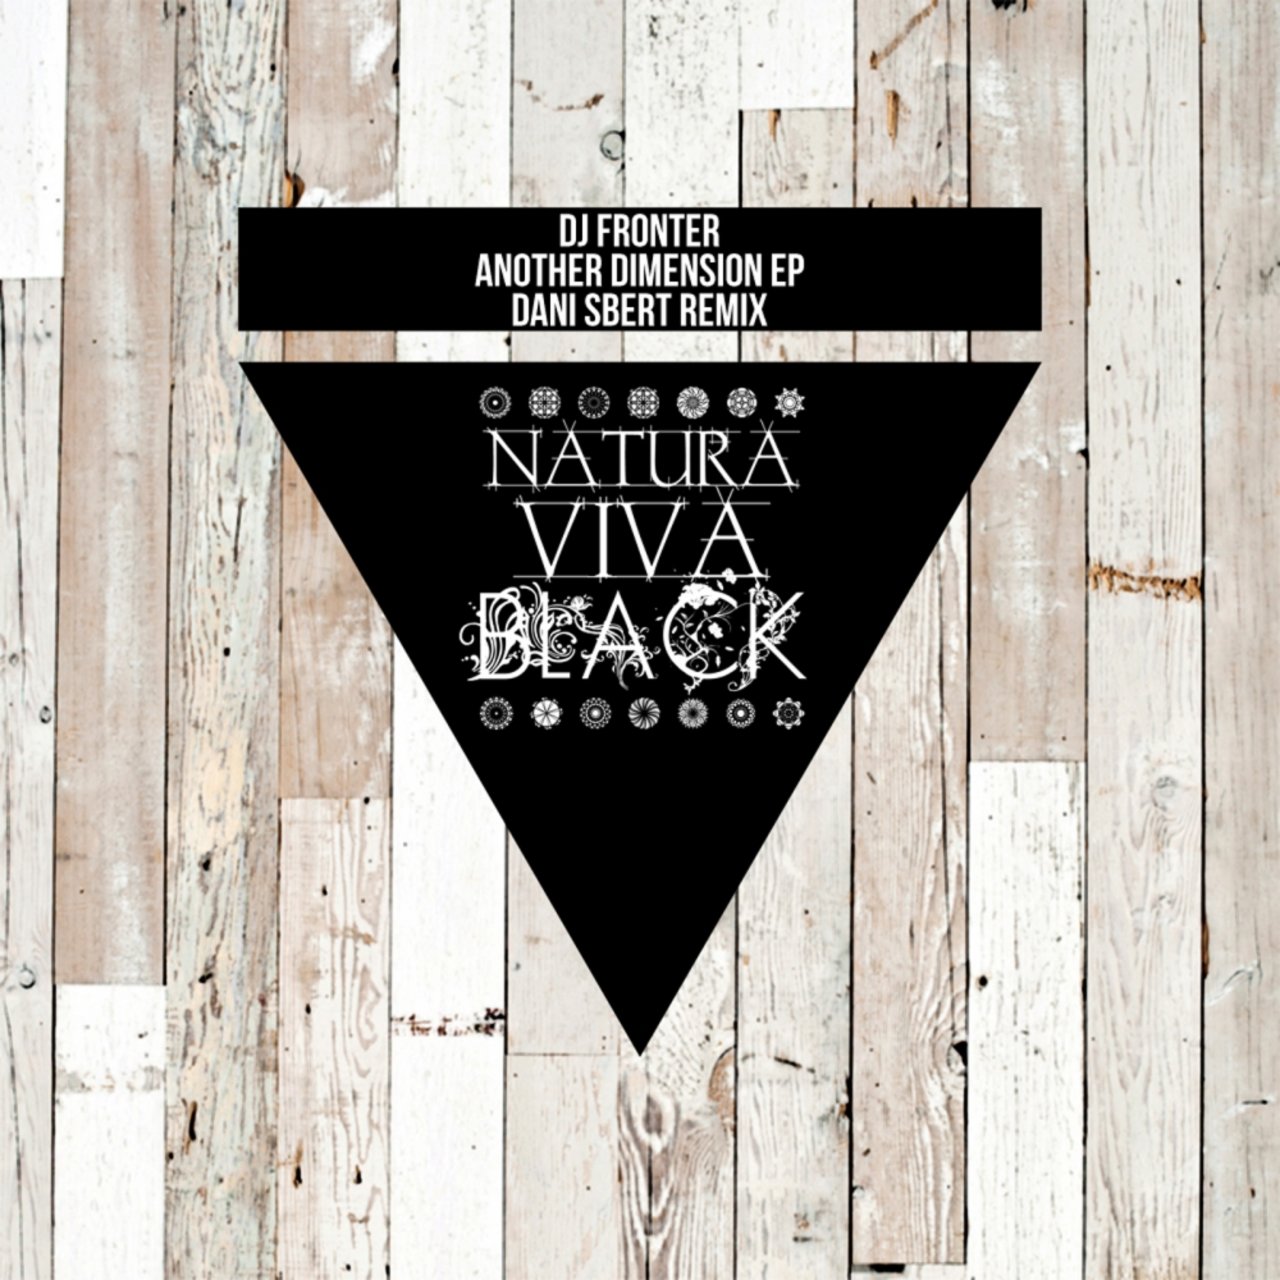 image cover: DJ Fronter - Another Dimension Ep / Natura Viva Black